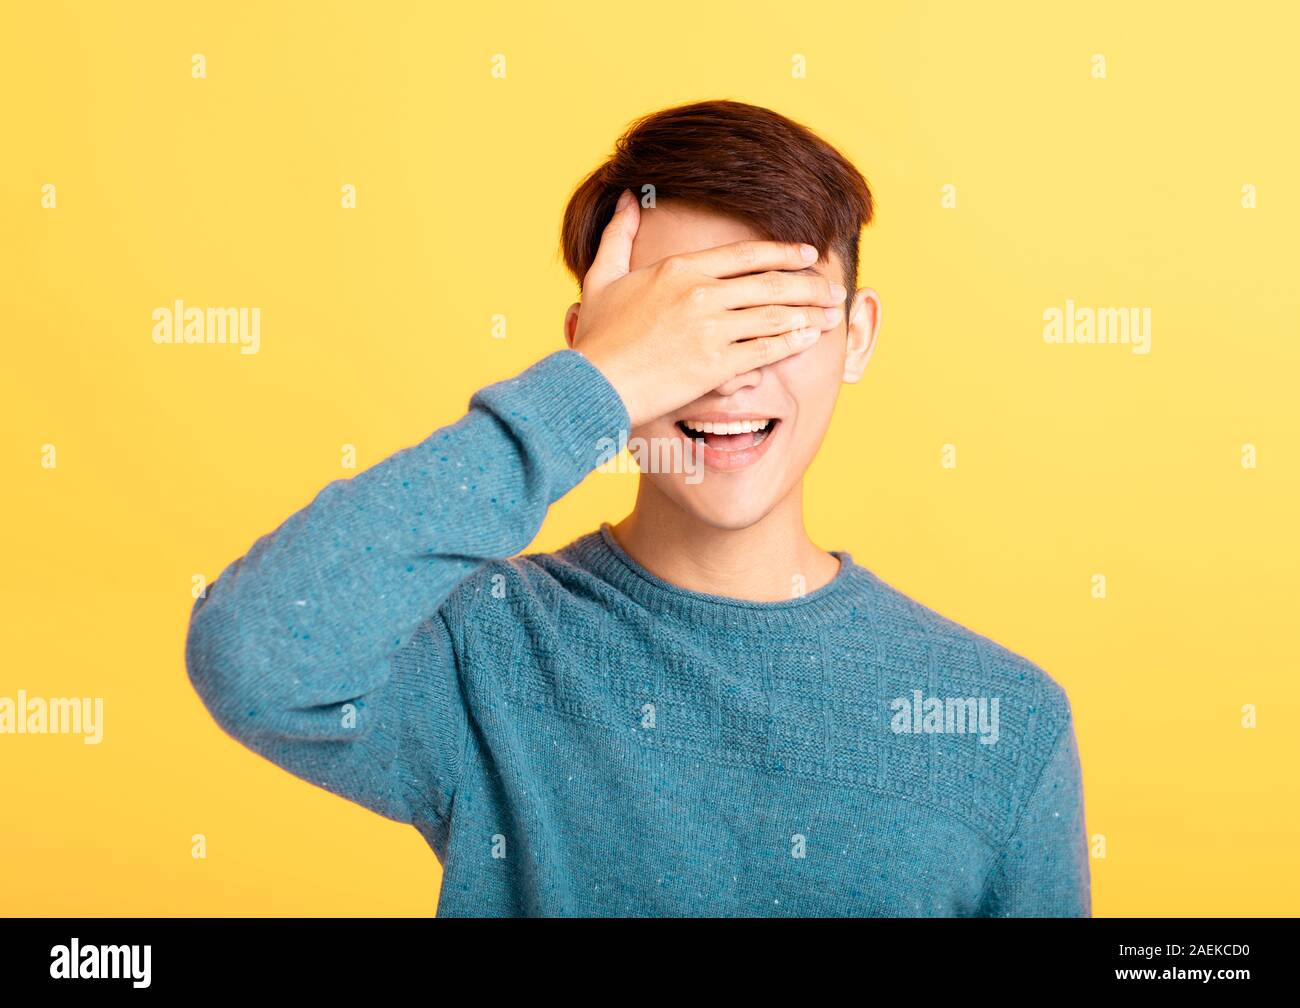 young man covering his eyes with hand Stock Photo